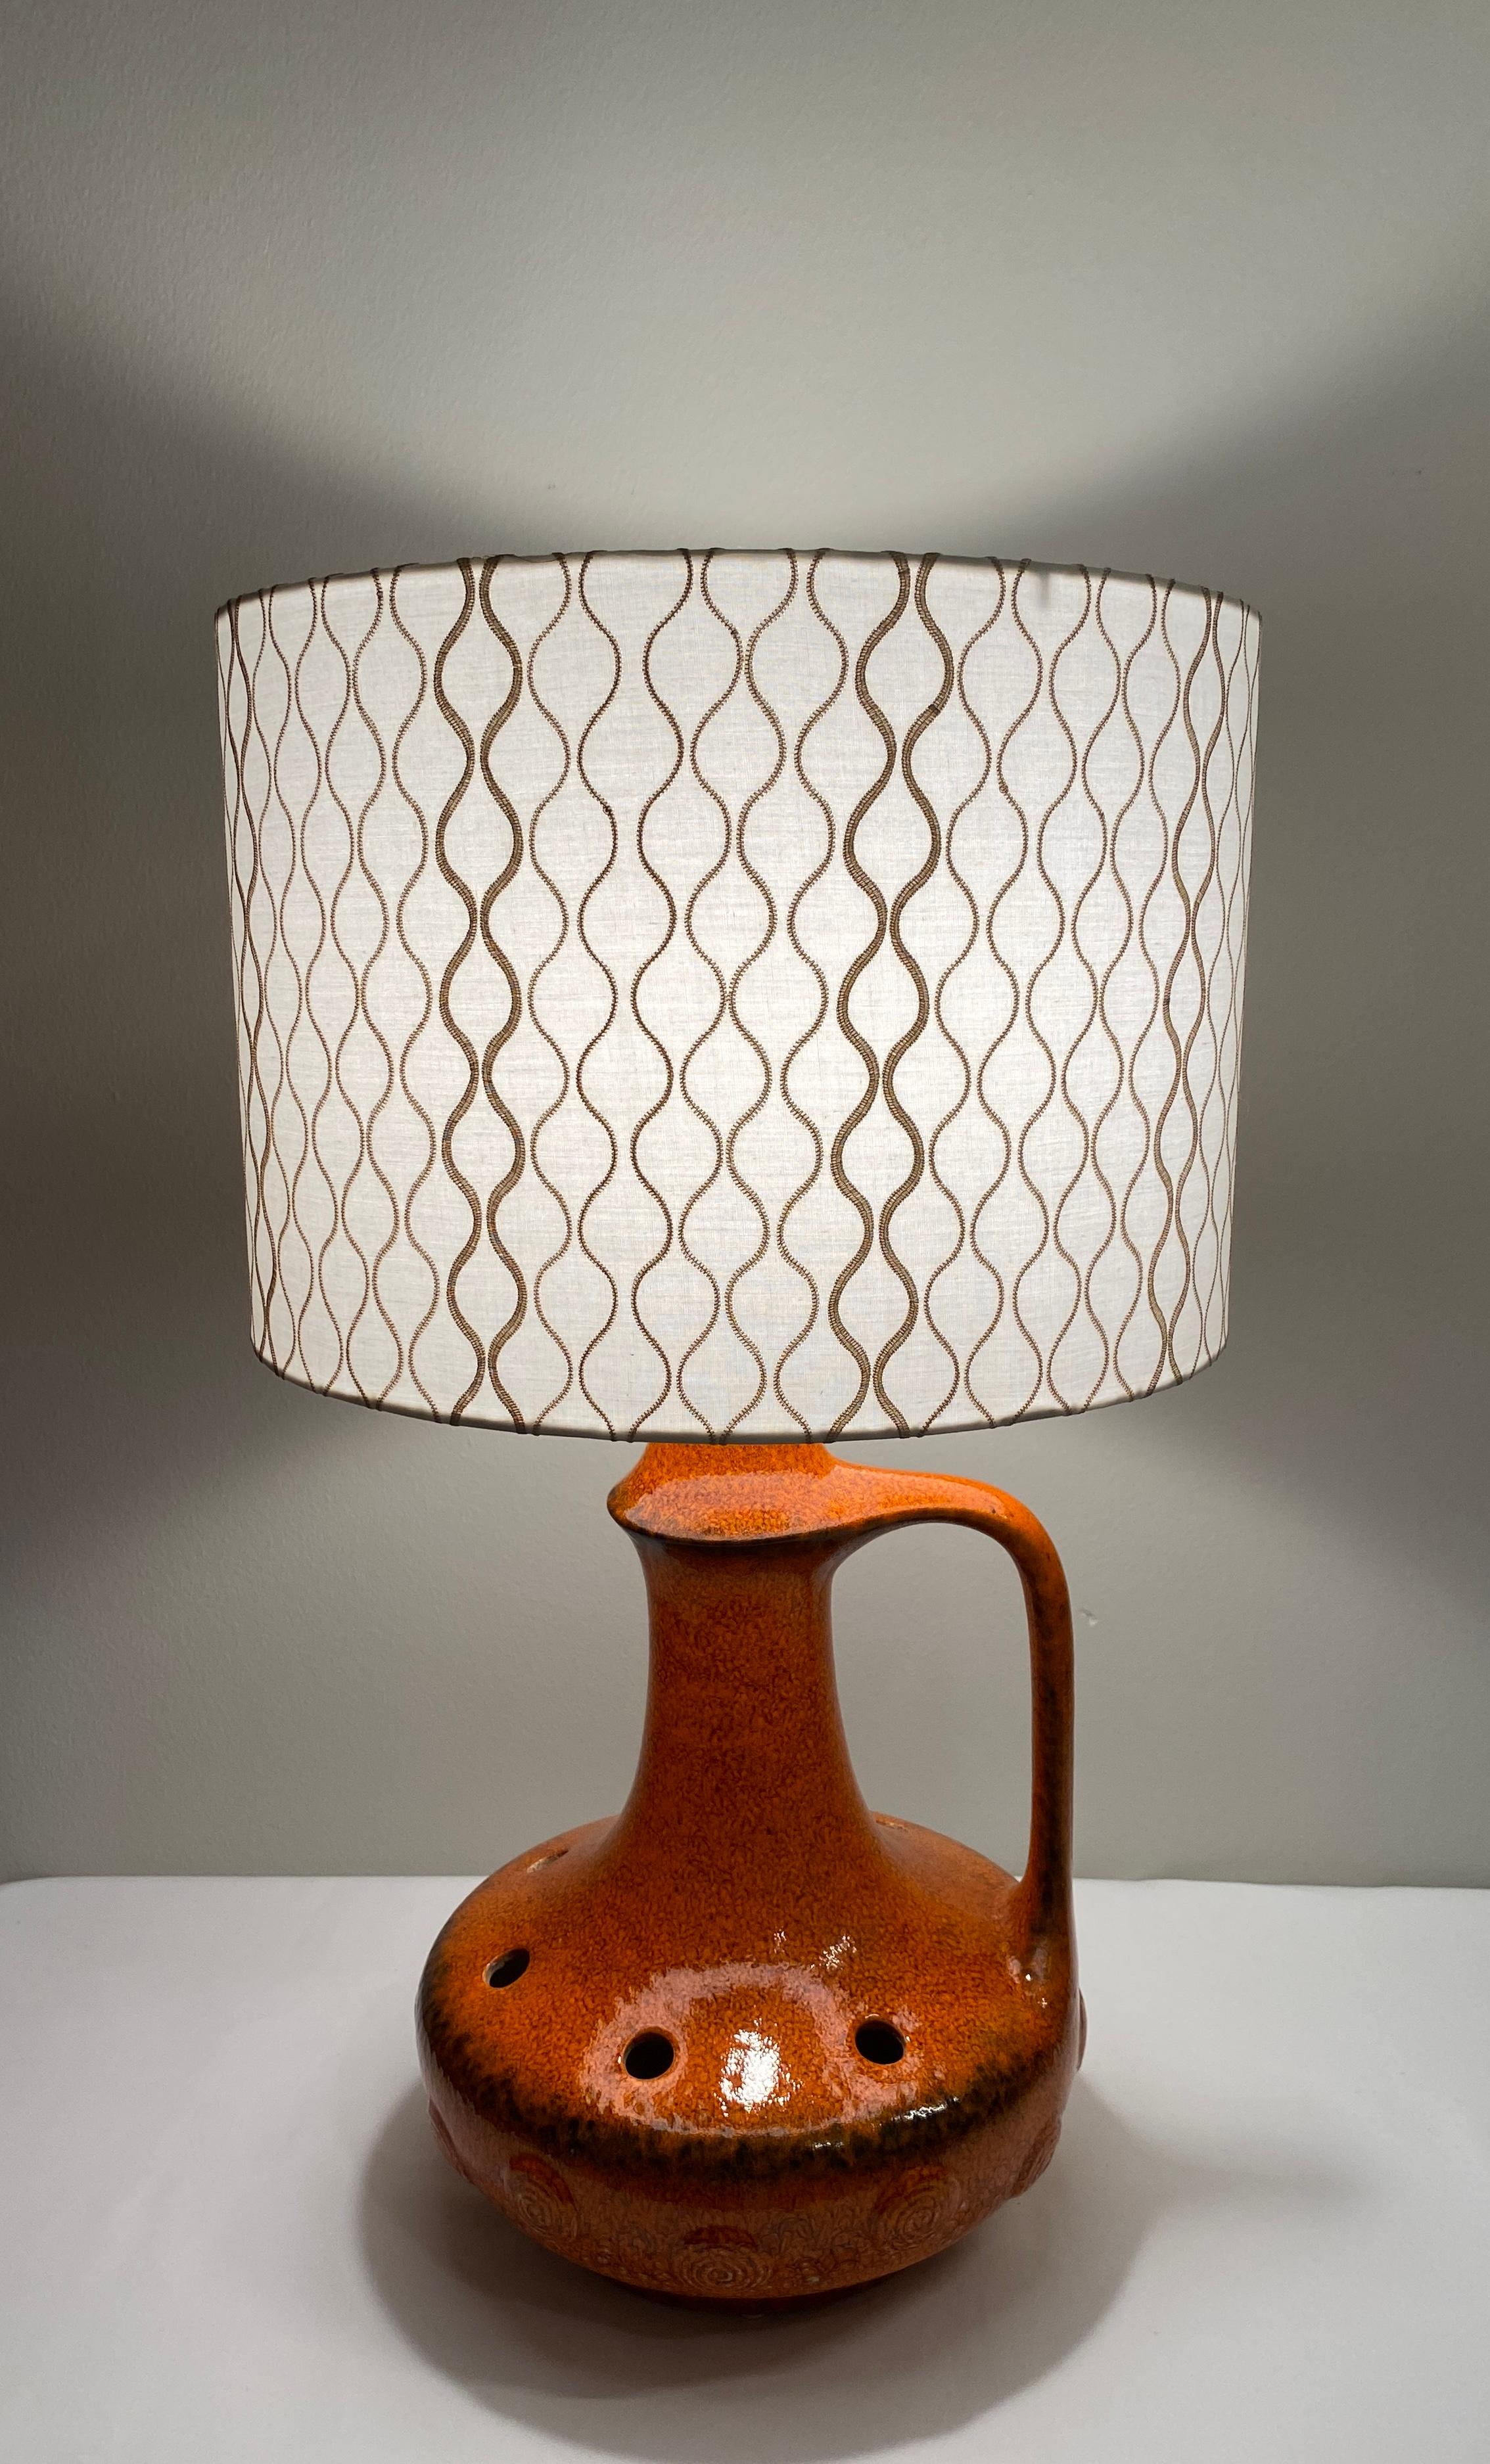 A large and very decorative French mid-century table lamp in a stunning glazed burnt orange ceramic with slight brown hues. Hand-crafted ceramic piece that originates from Vallauris, France. Made in the manner of Georges Pelletier lamps. 

Very